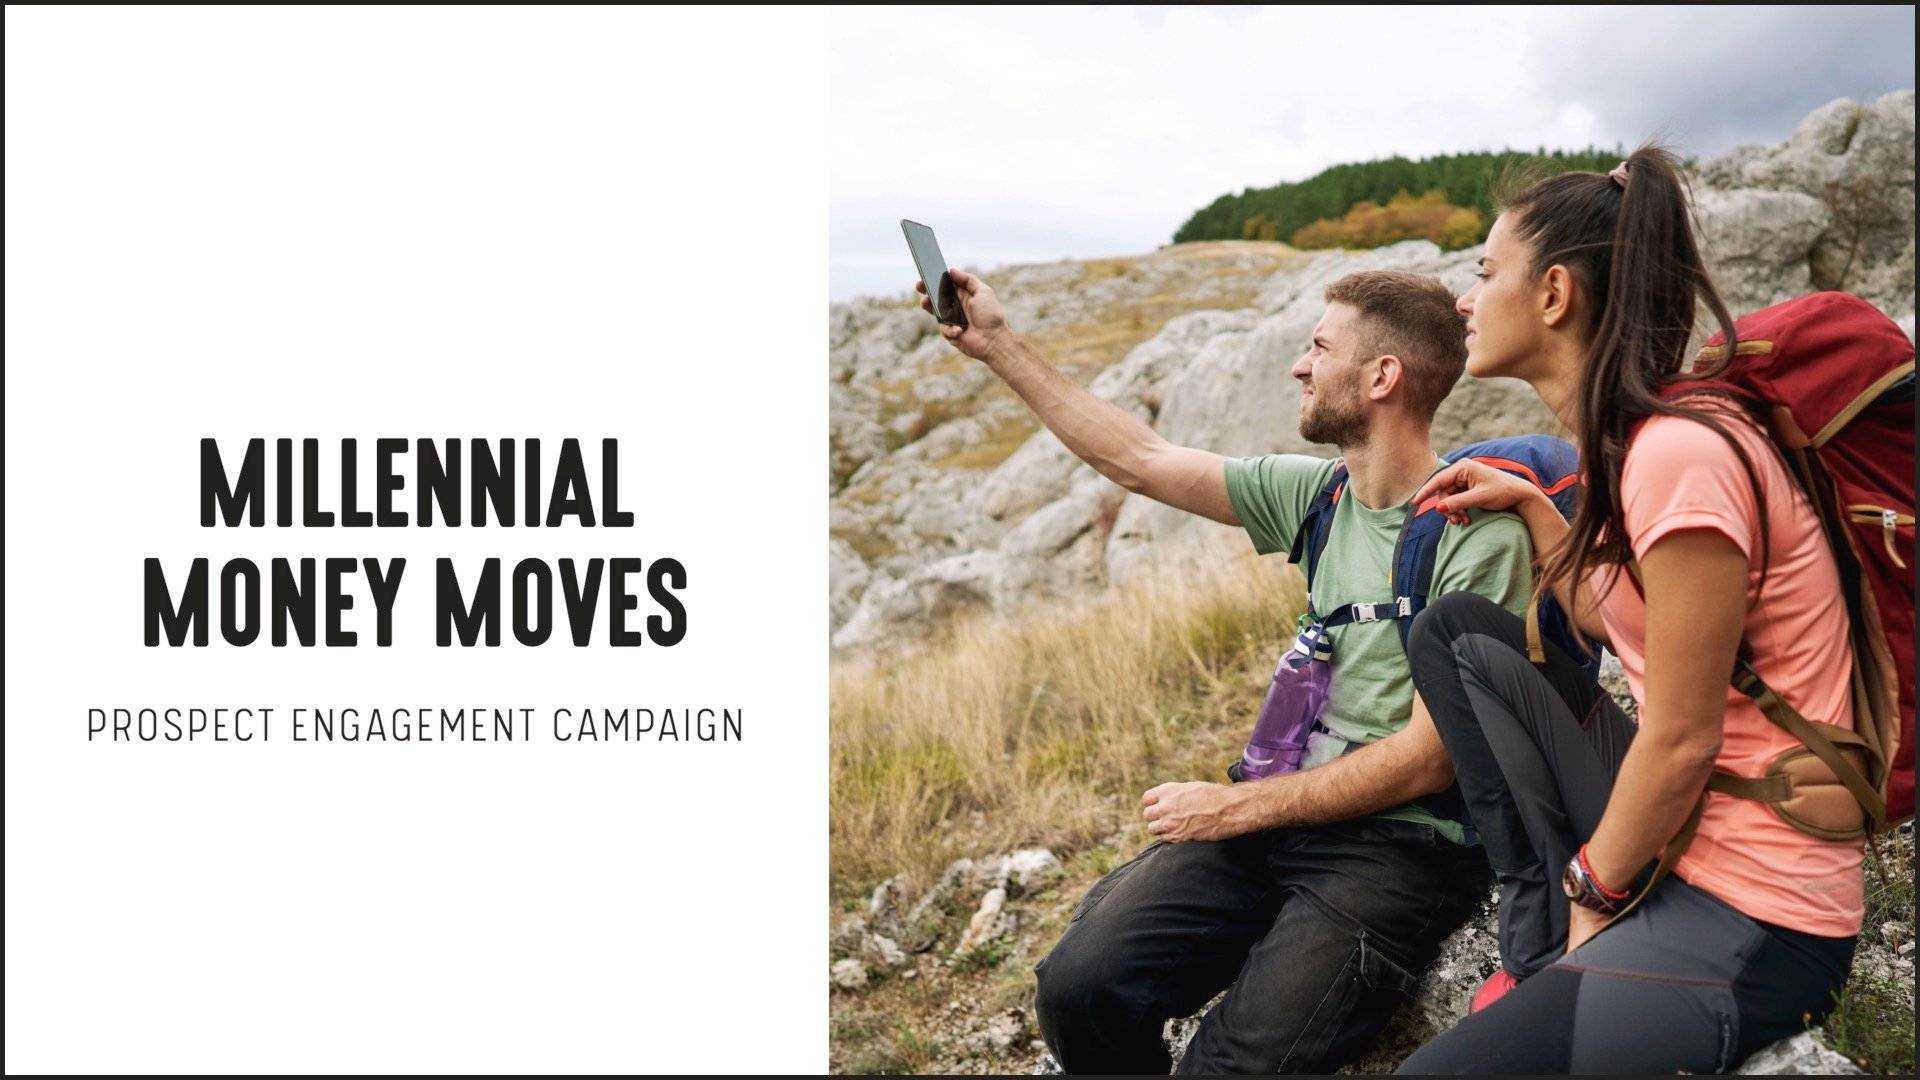 [NEW] Millennial Money Moves Prospect Engagement Campaign